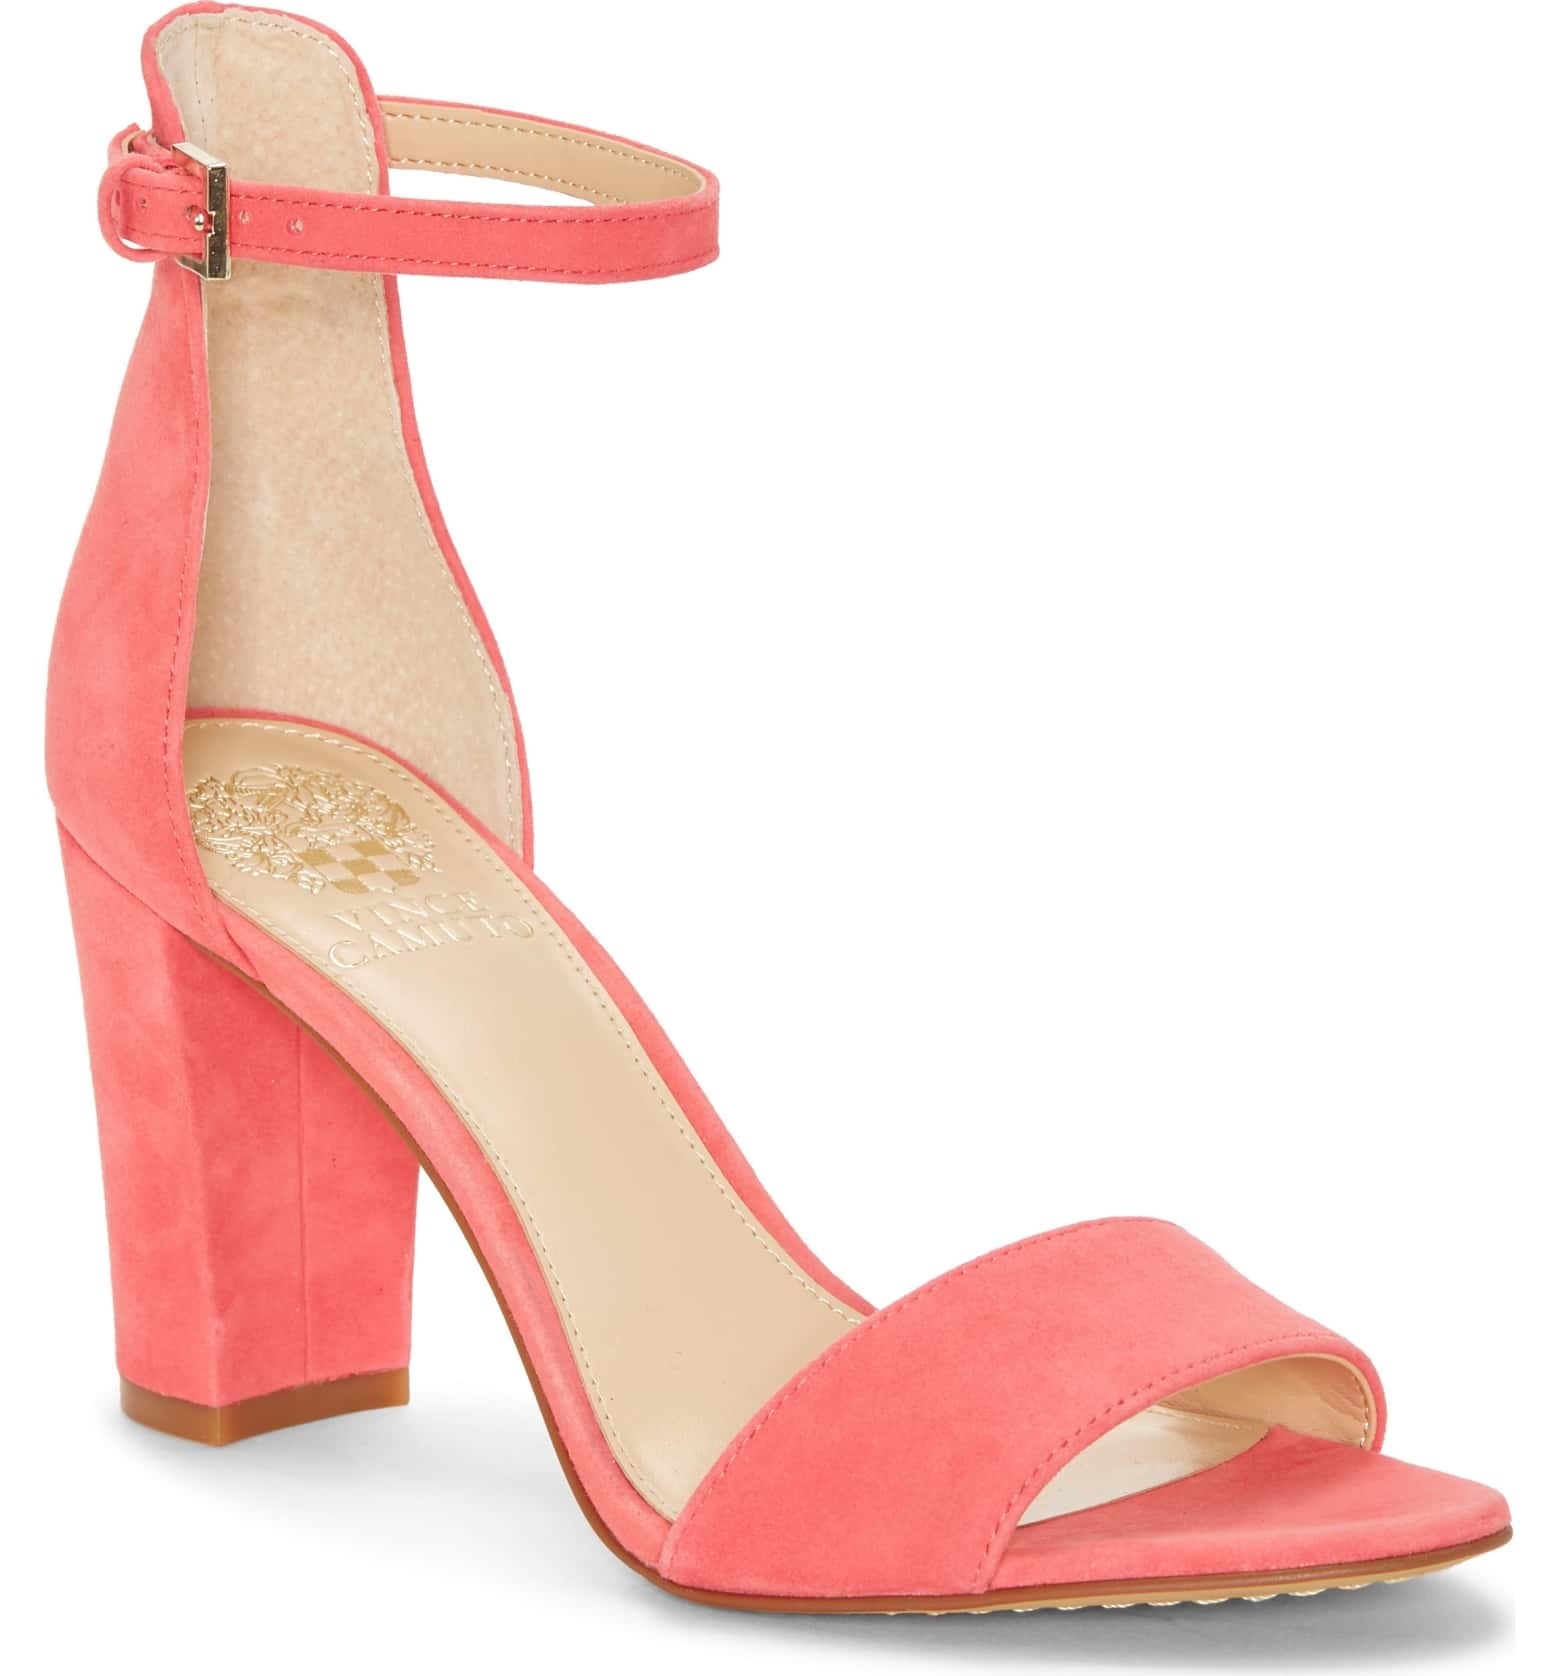 28 Must-Have Sandals From Nordstrom For Your Spring Wardrobe